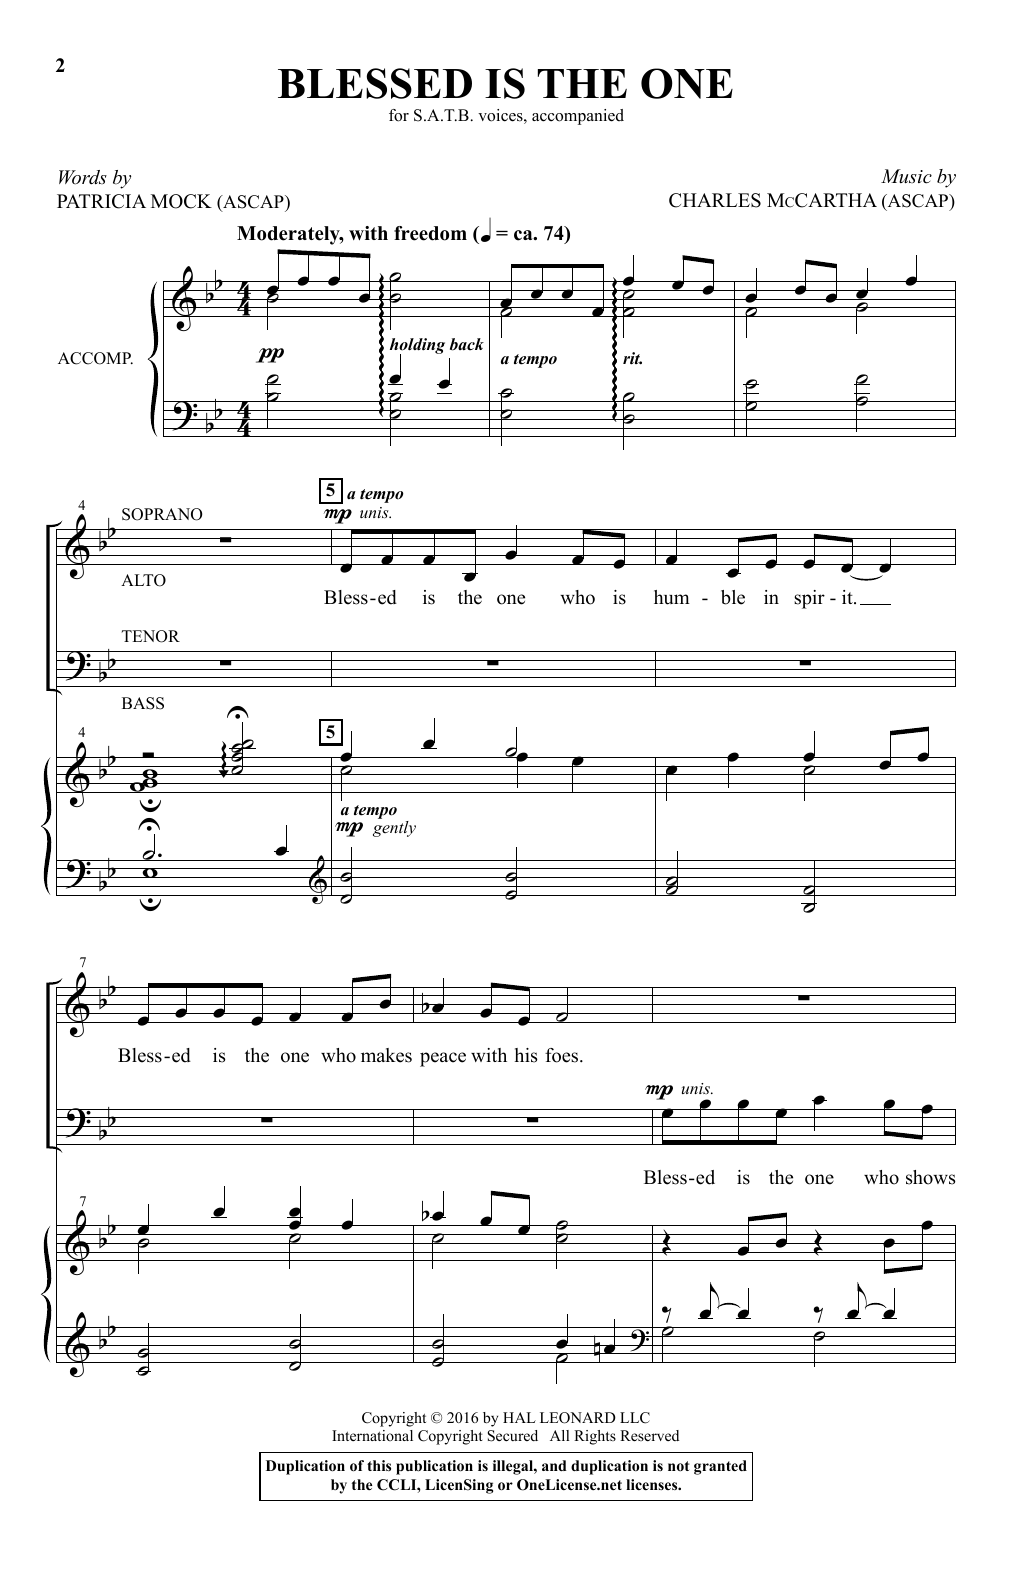 Download Charles McCartha Blessed Is The One Sheet Music